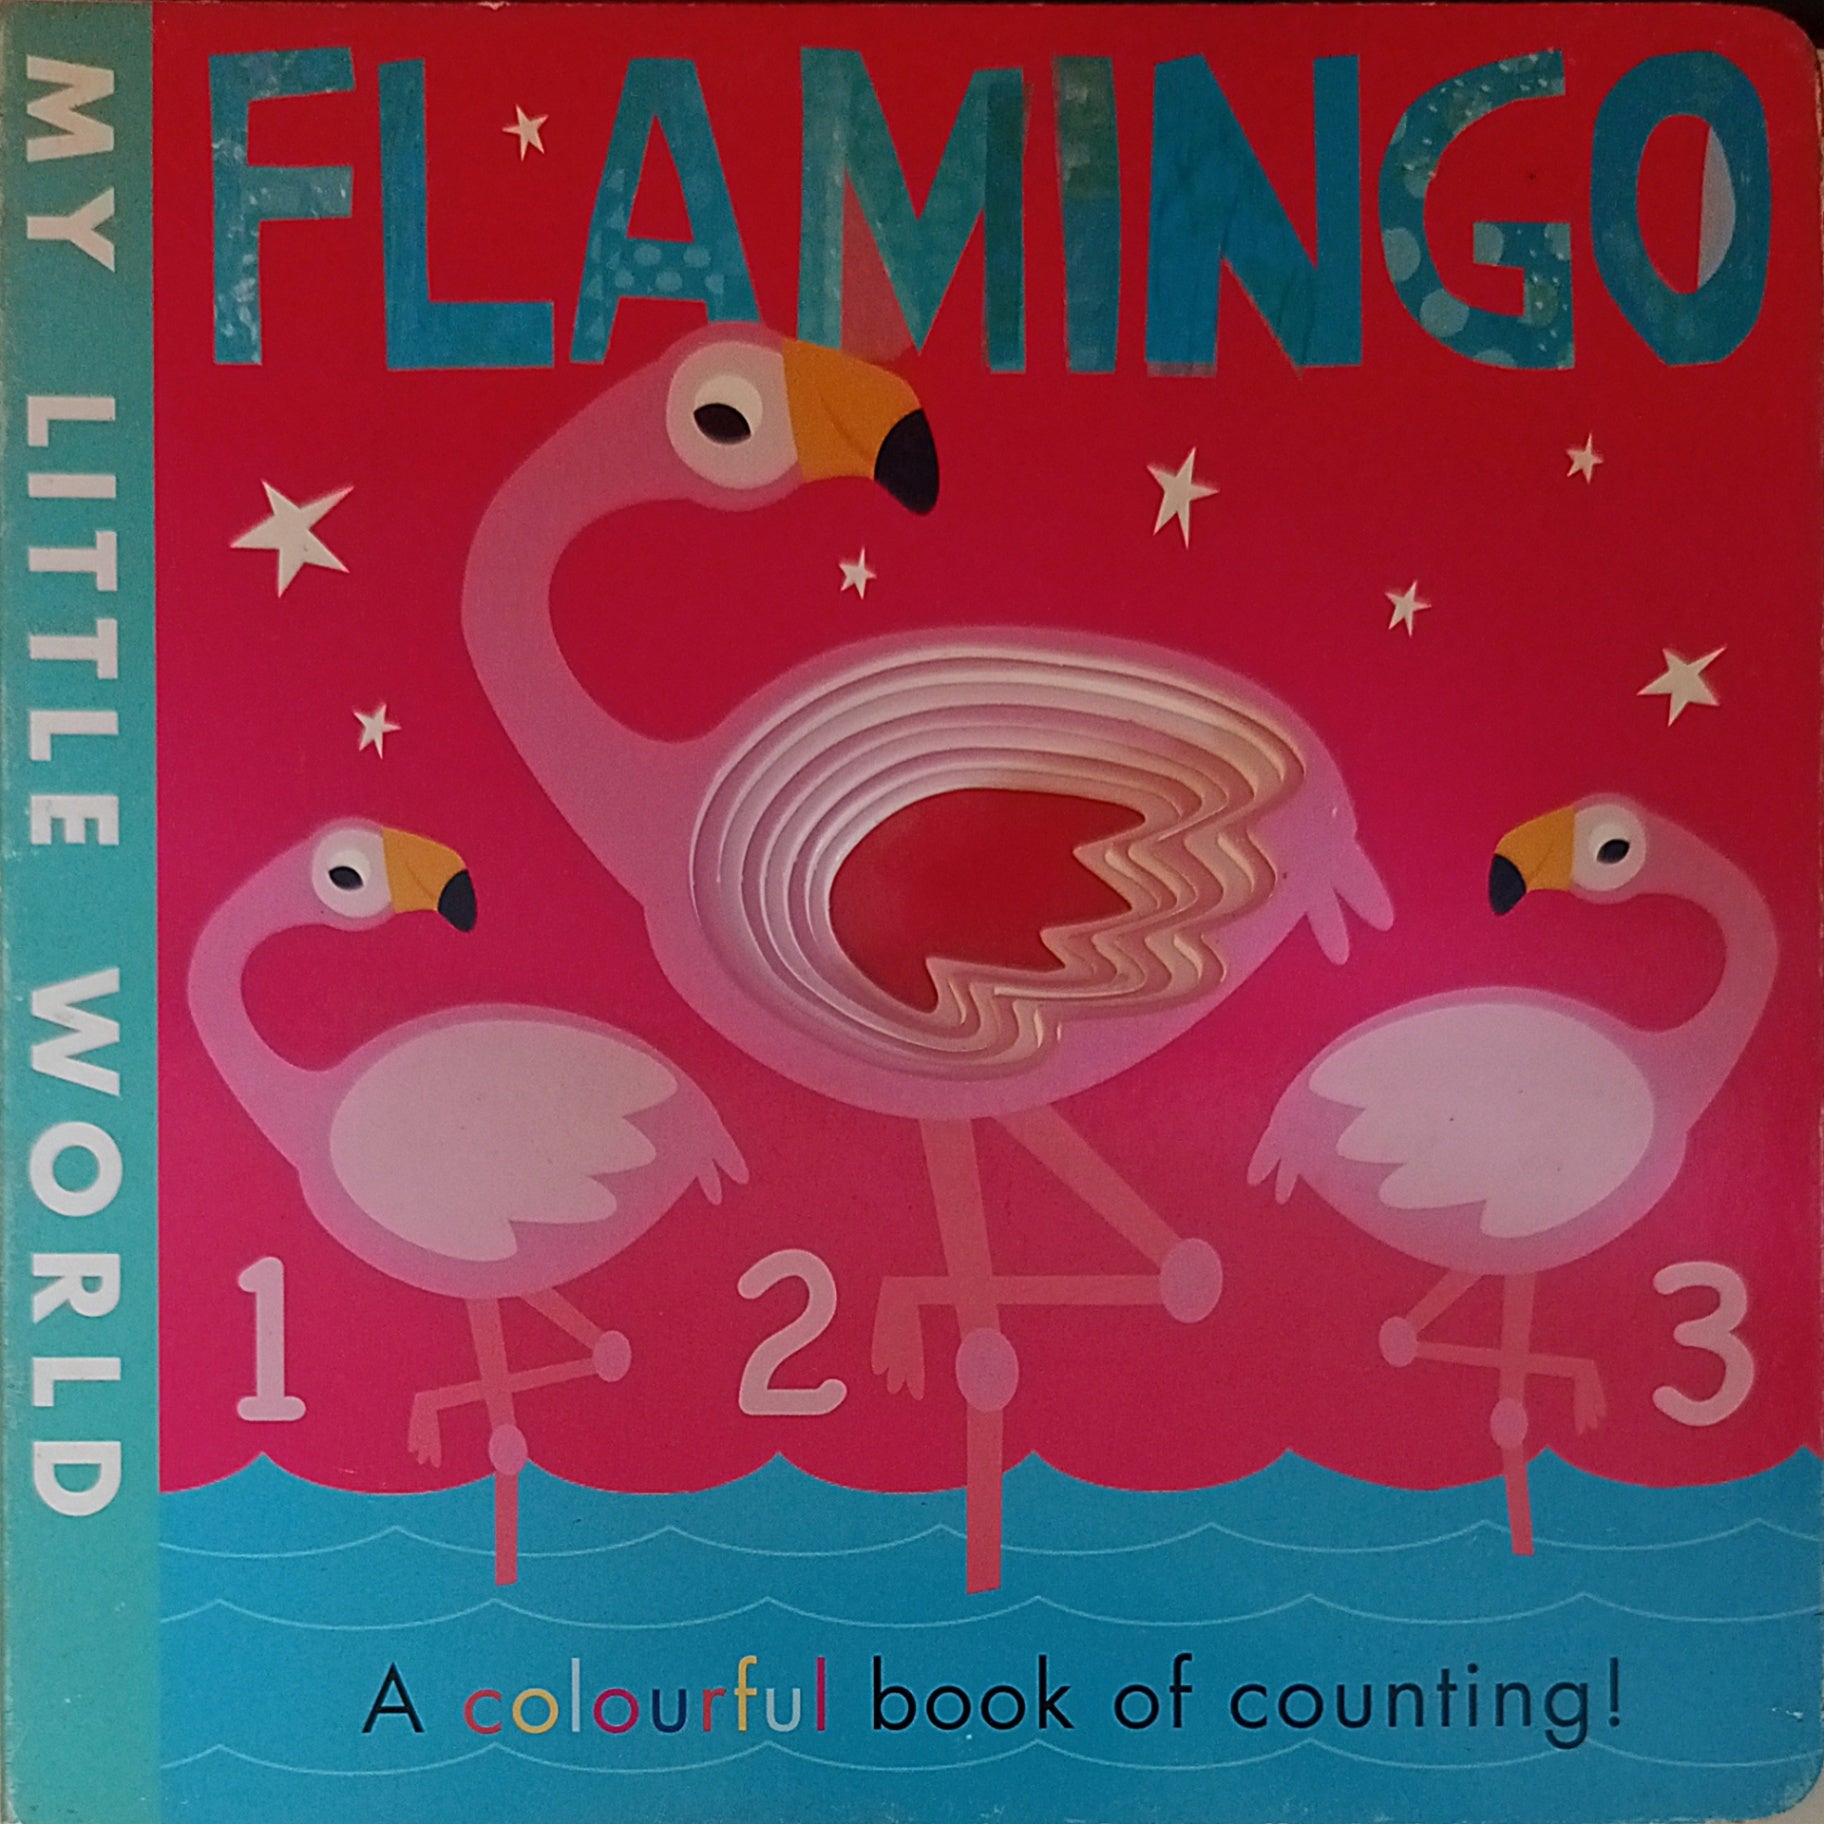 Flamingo-A Colourful Book of Counting!